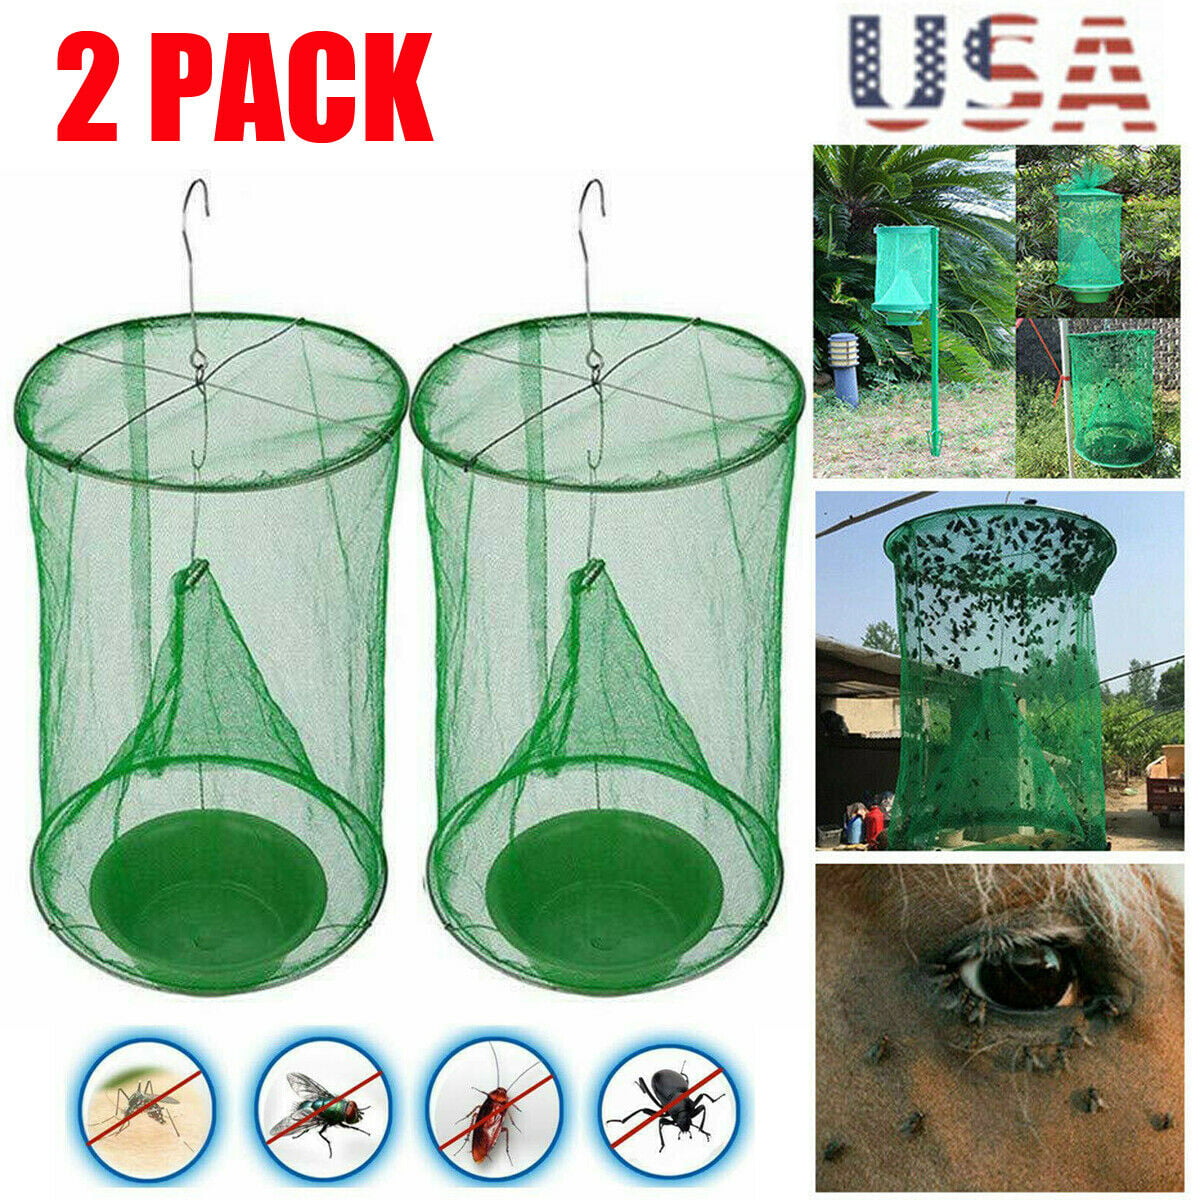 FlyMax The Ranch Fly Trap Outdoor Fly Trap Killer Bug Cage Net Perfect For Horse 